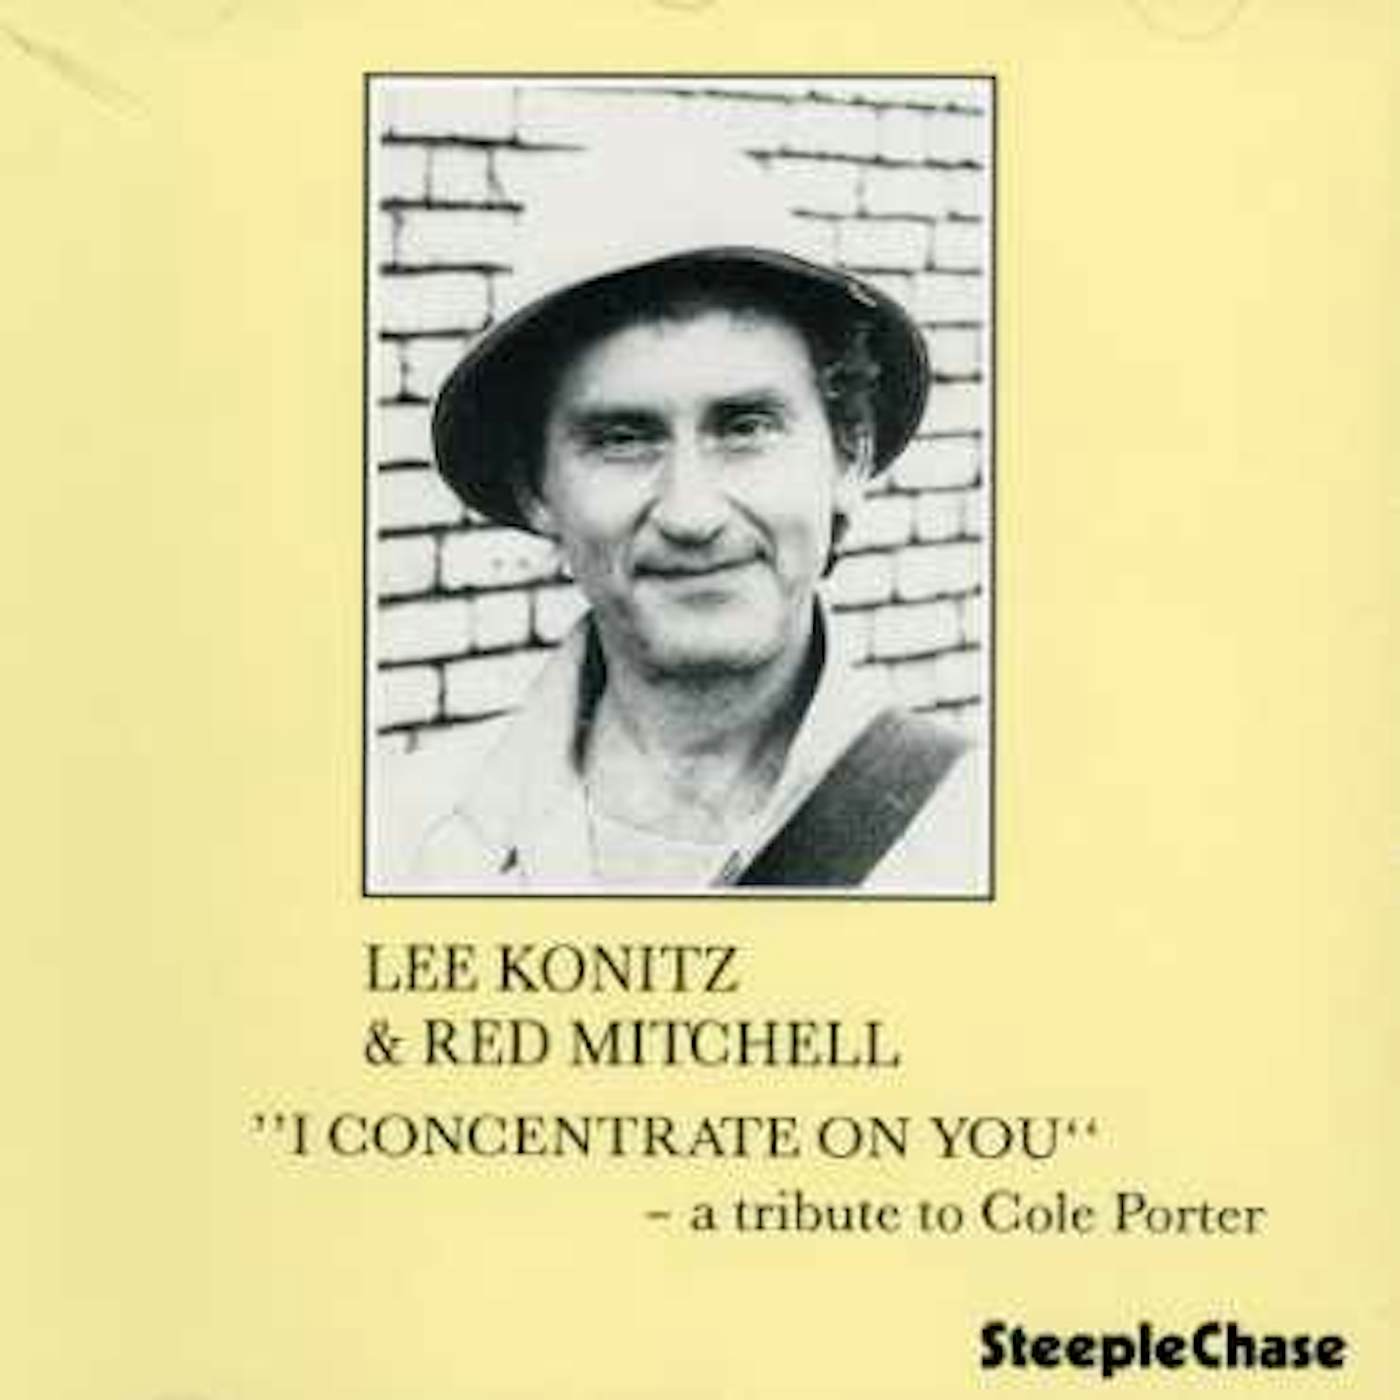 Lee Konitz I CONCENTRATE ON YOU CD